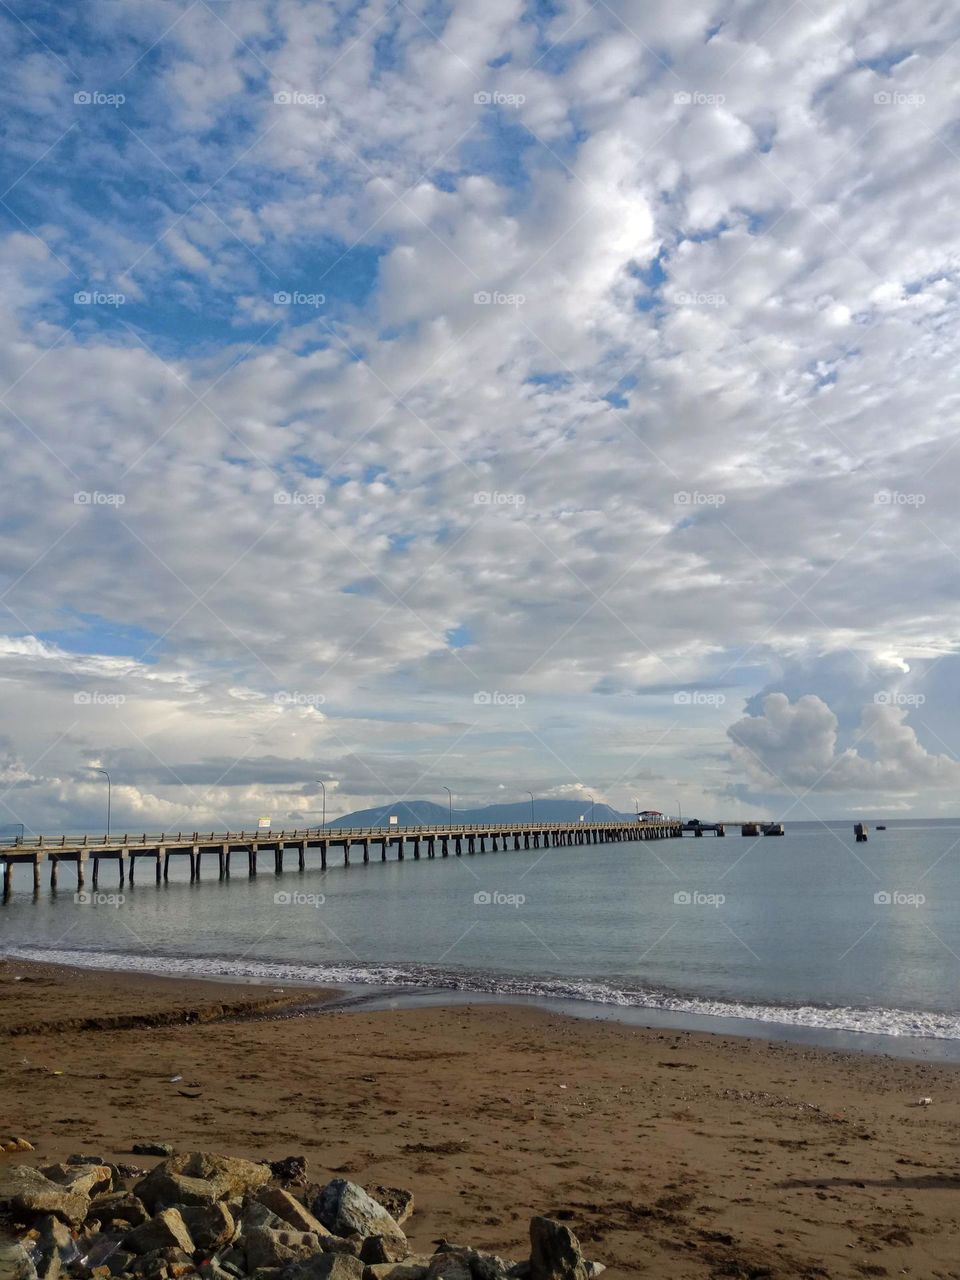 An afternoon with clouds. Atauro island at the horizon, a pier for fuel boats and beach